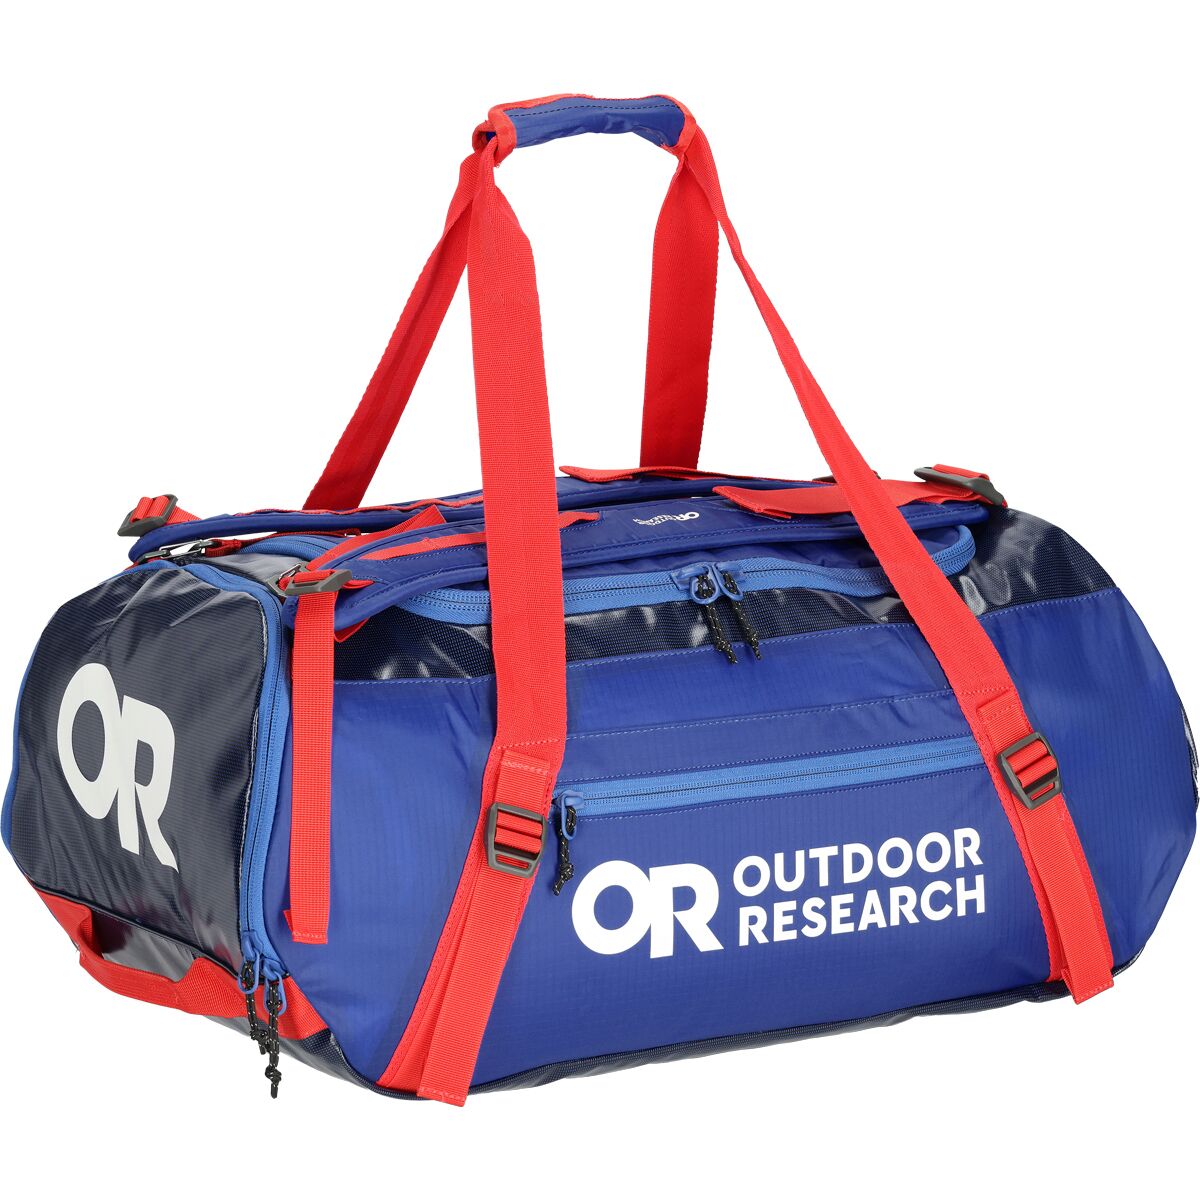 Outdoor Research CarryOut Duffel 40L